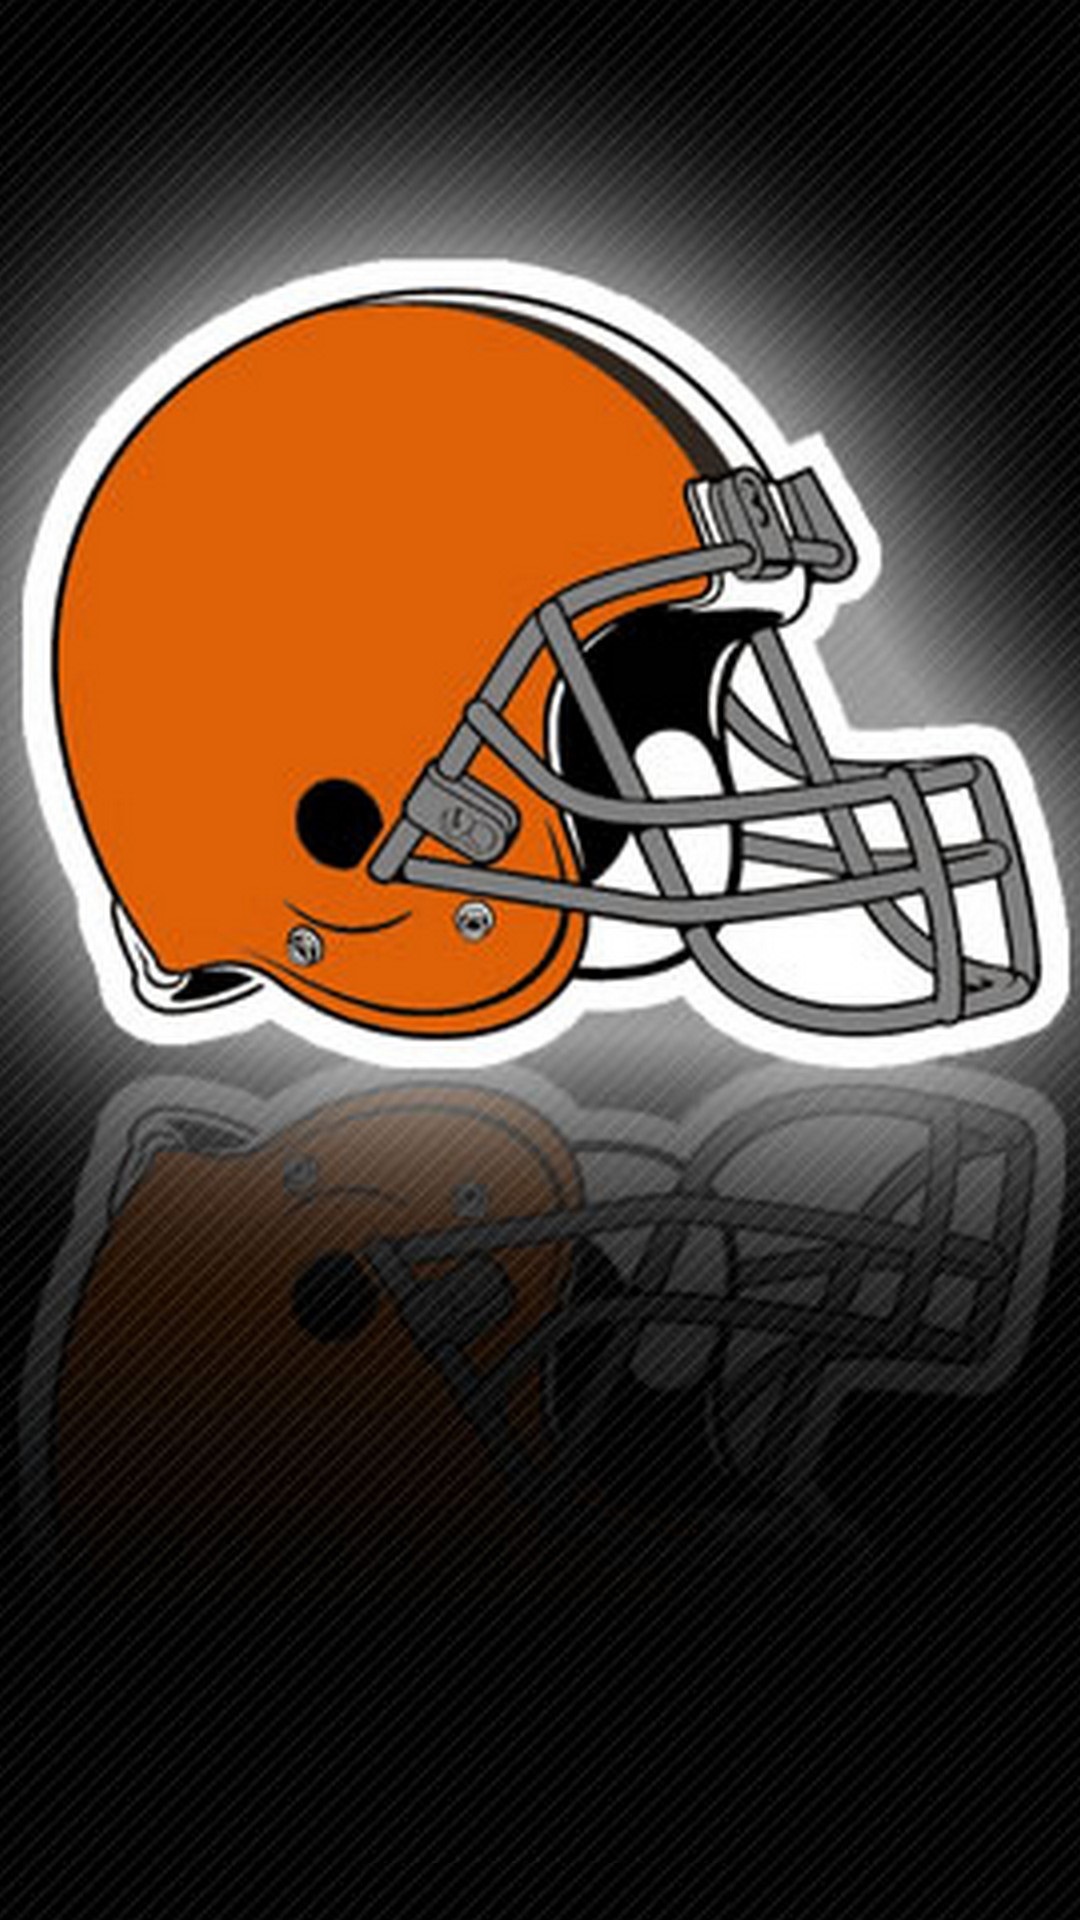 Cleveland Browns iPhone Backgrounds With high-resolution 1080X1920 pixel. Download and set as wallpaper for Apple iPhone X, XS Max, XR, 8, 7, 6, SE, iPad, Android